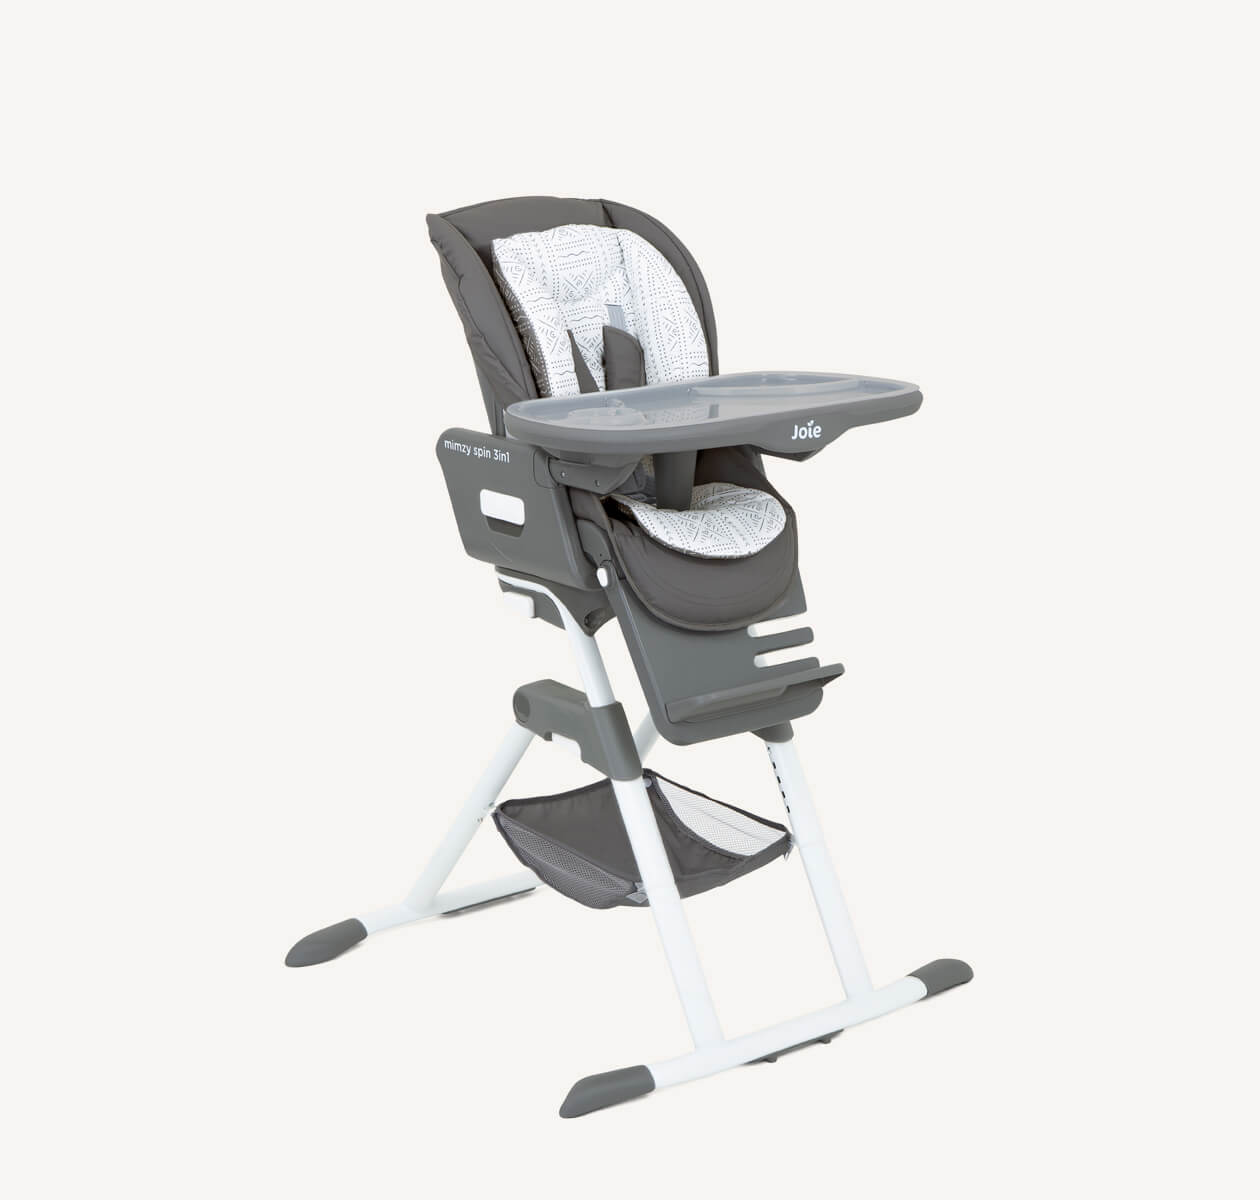 The Joie highchair Snacker 3in1 in a dark and light gray monotone geometric print from a right angle. 